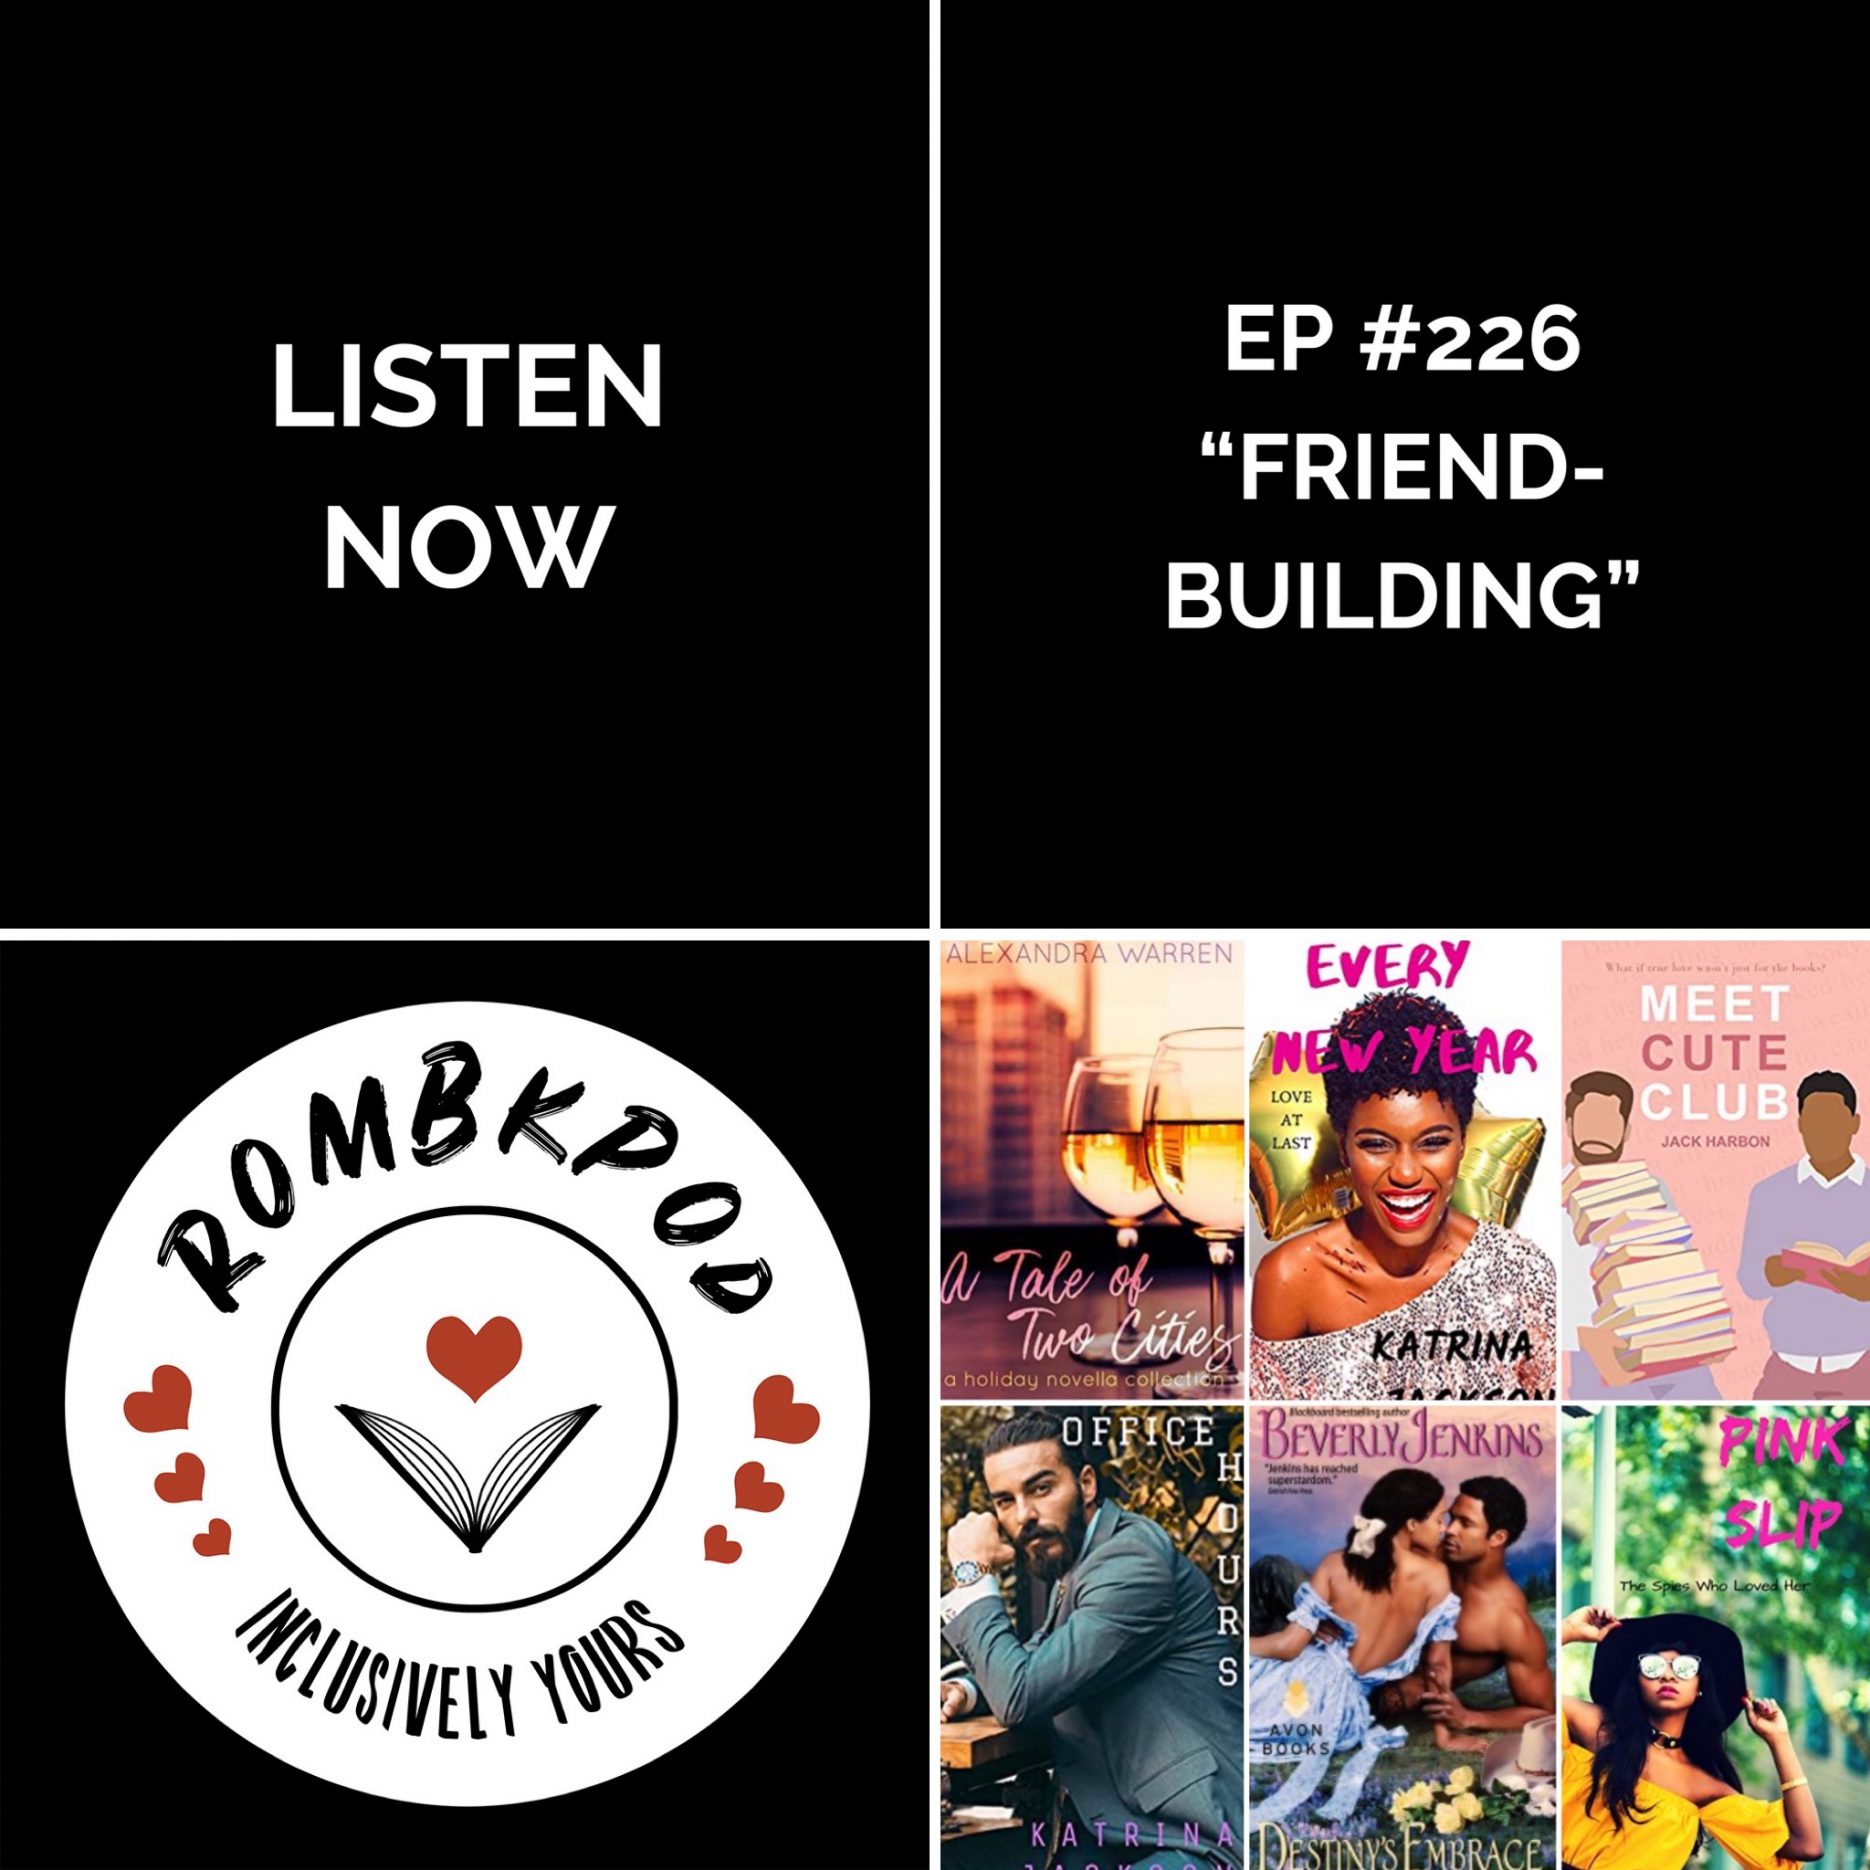 IMAGE: lower left corner, RomBkPod heart logo; lower right corner, ep #226 book cover collage; IMAGE TEXT: Listen Now, ep #226 "Friend-Building"